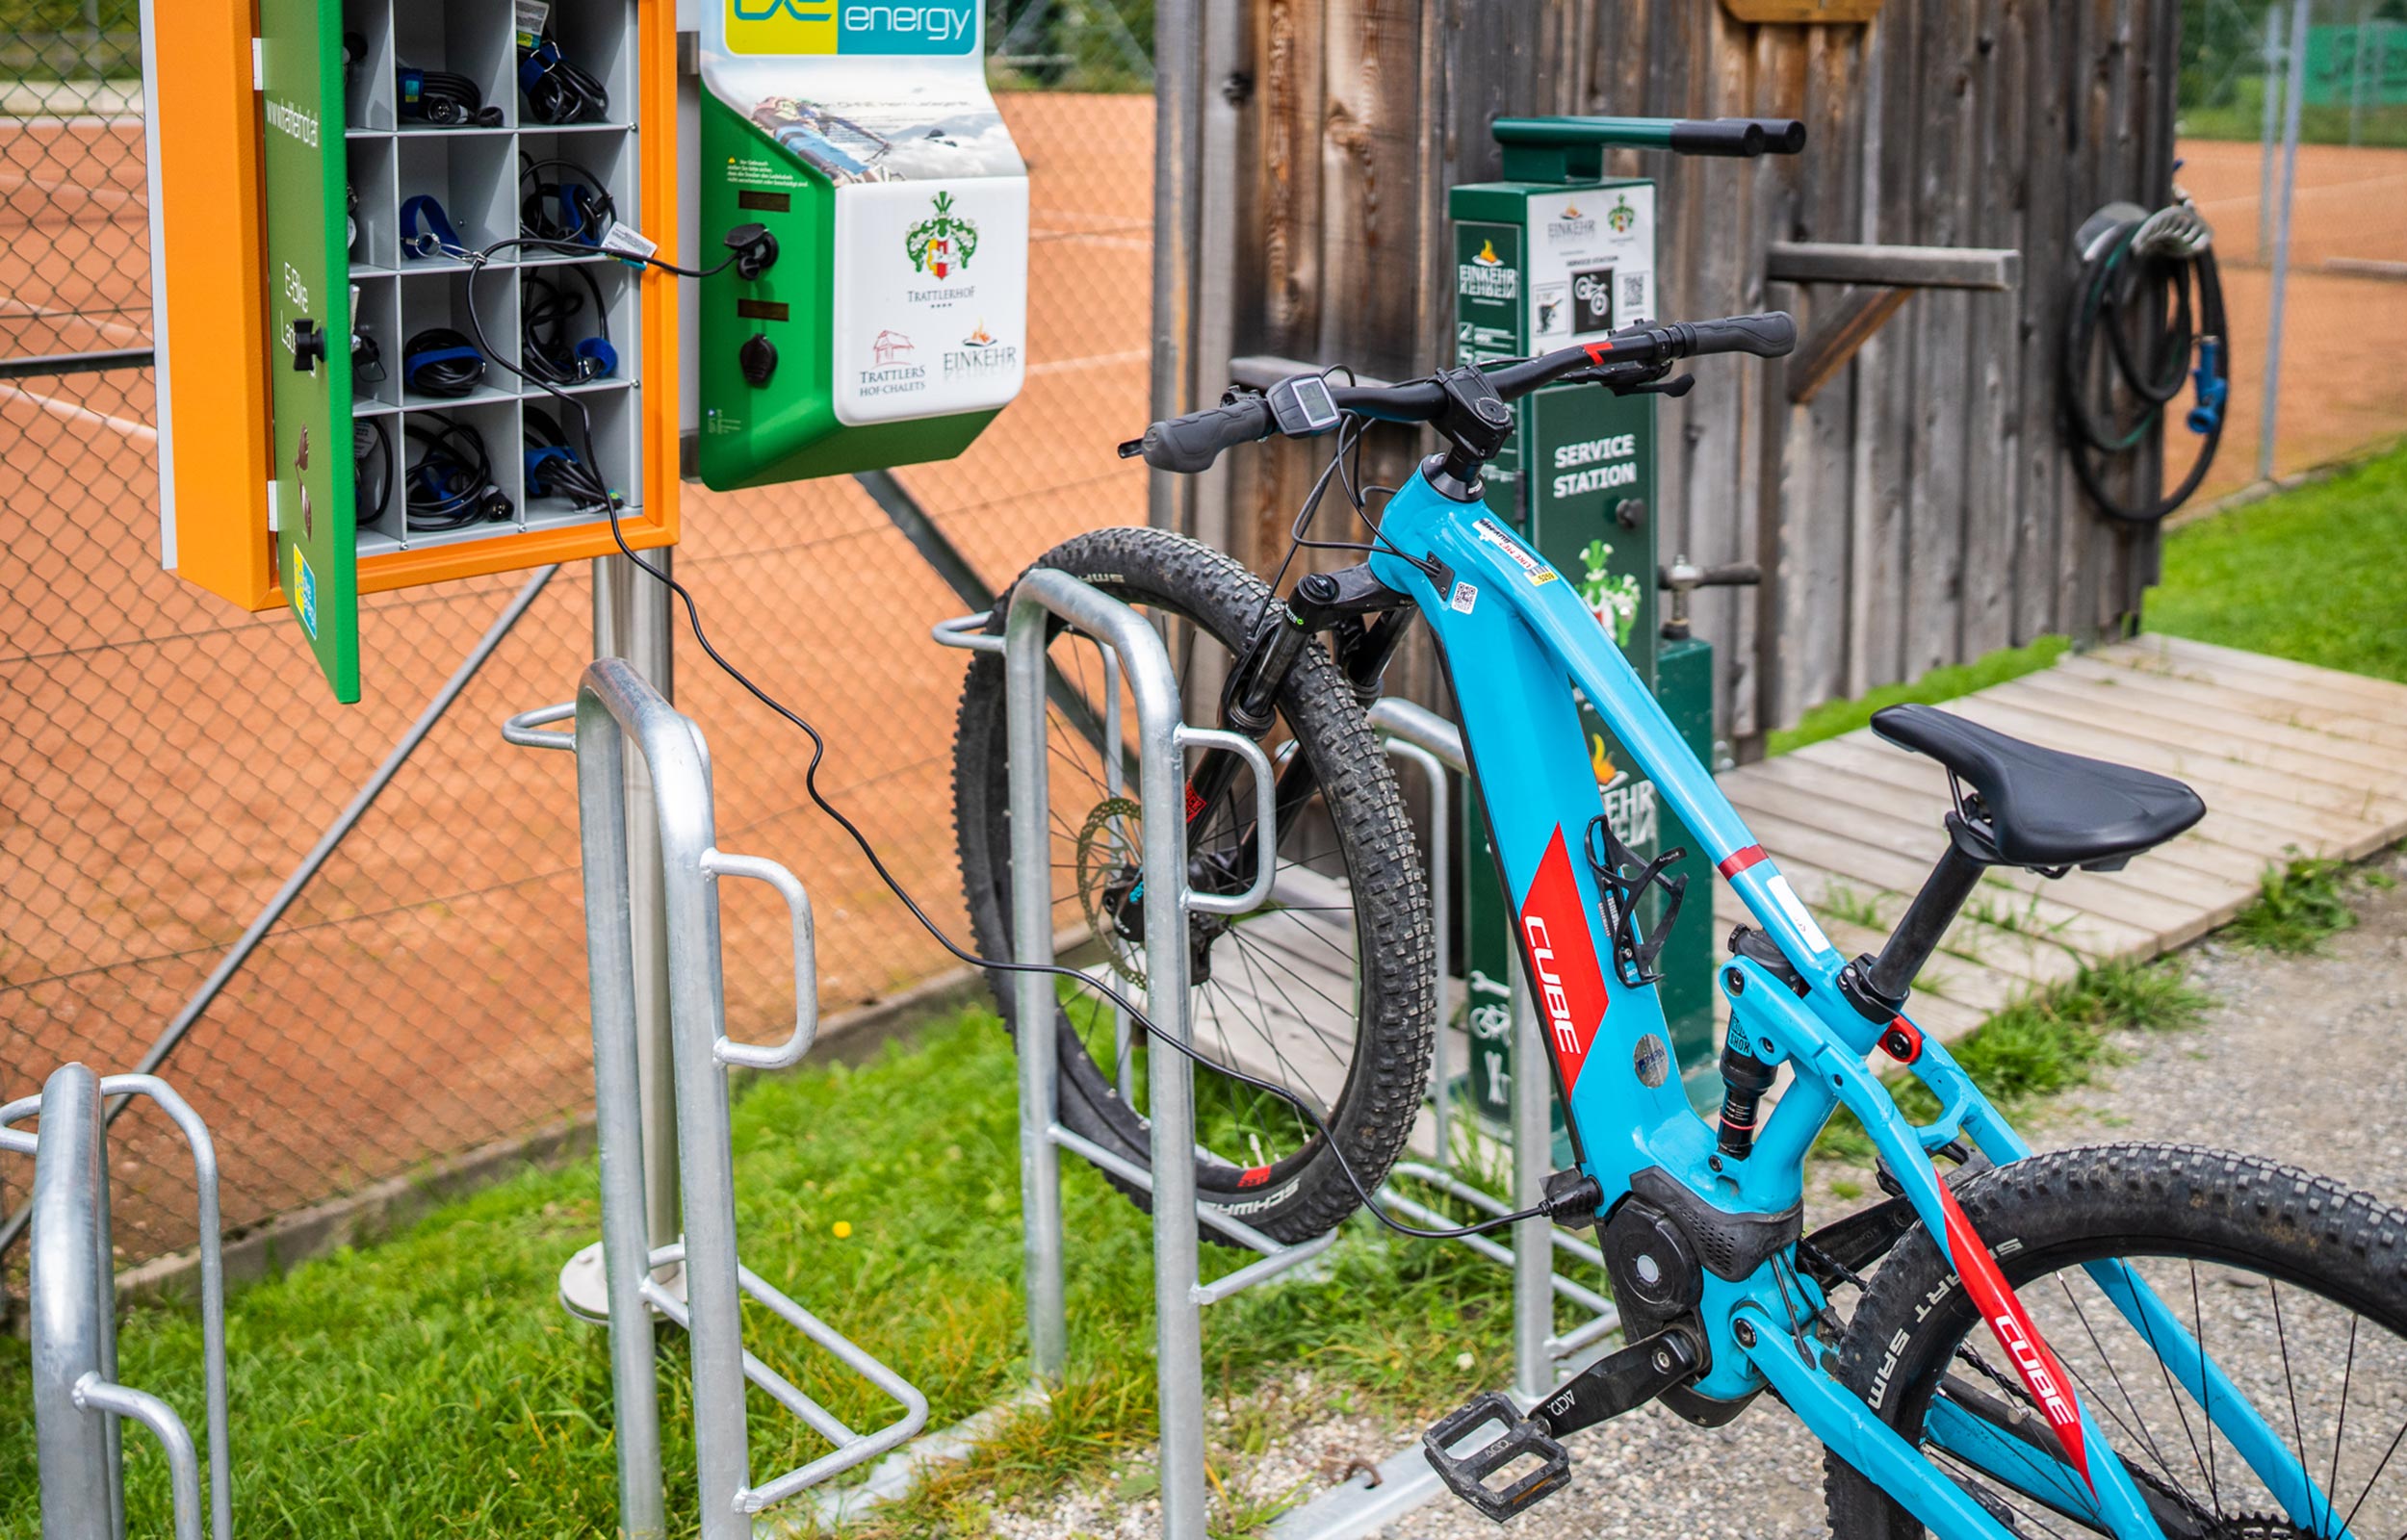 An e-bike in a bicycle stand at a charging station